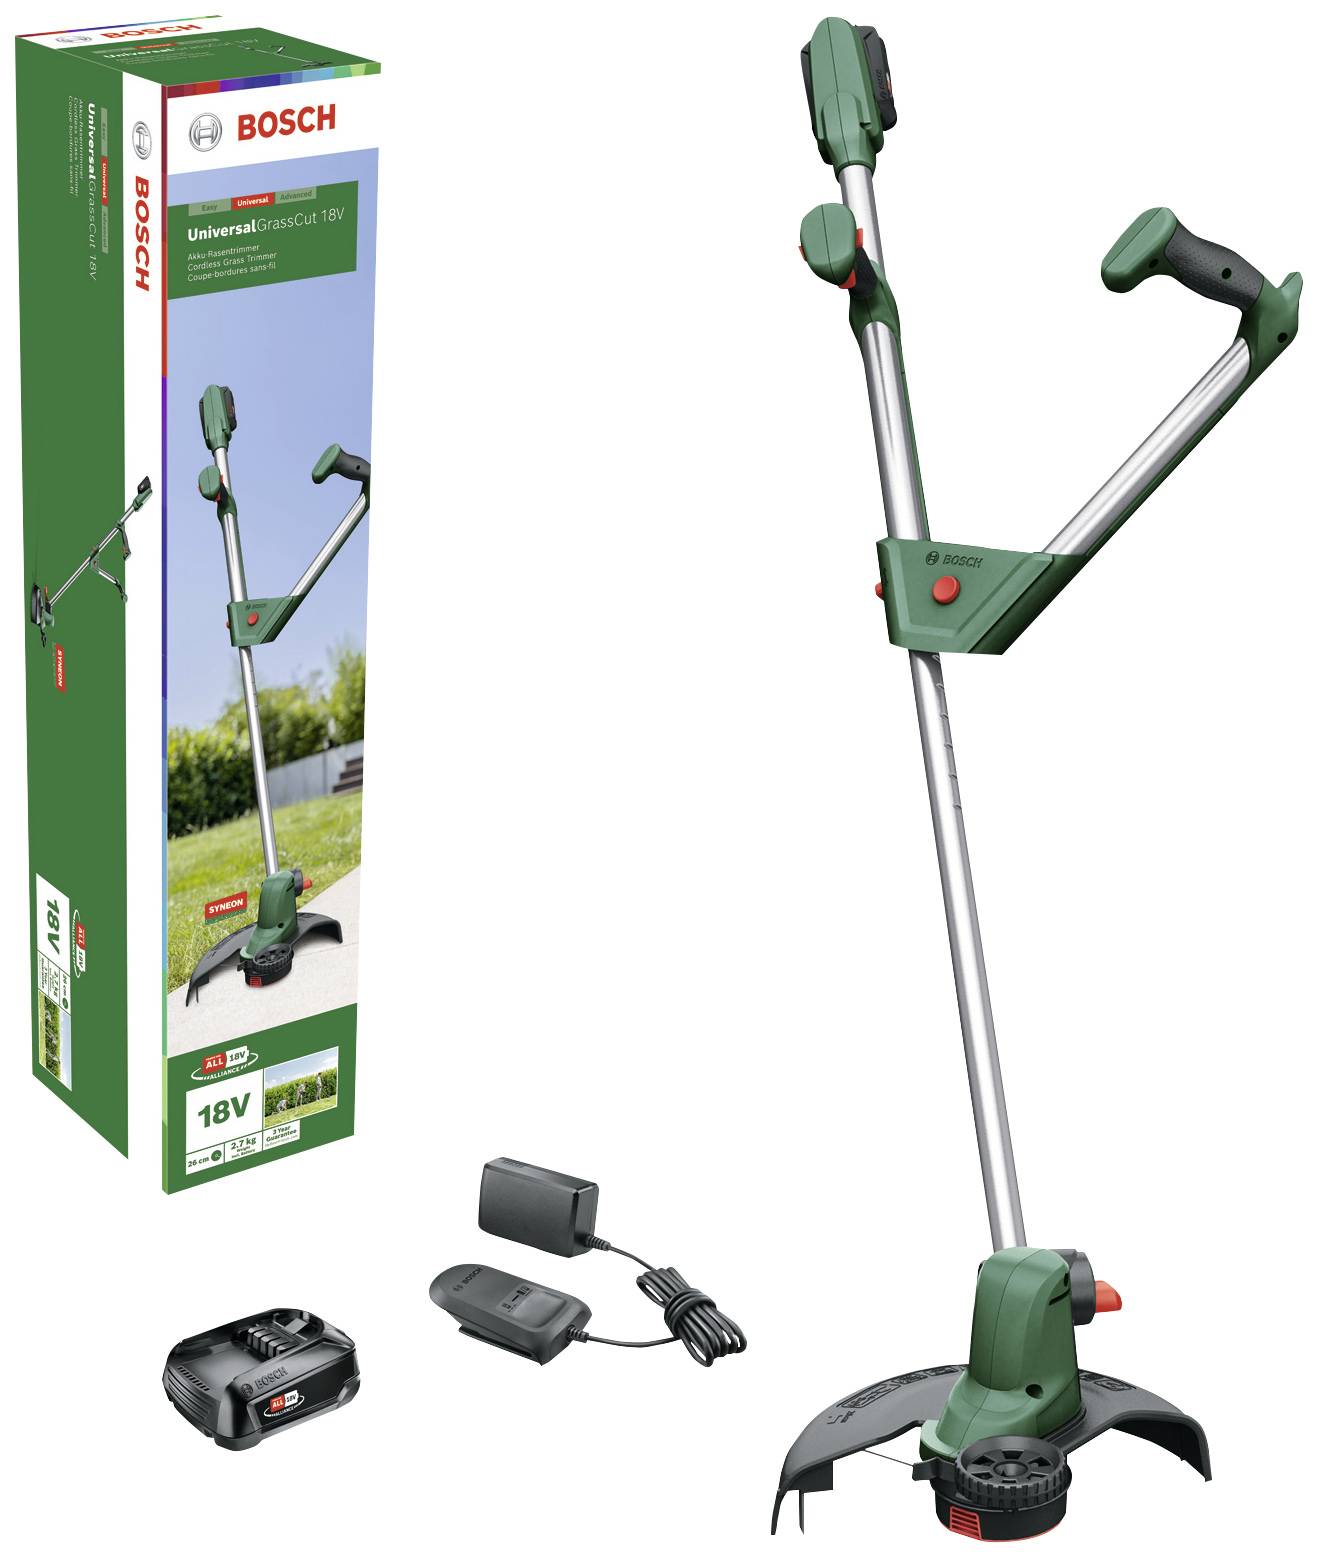 Commotie Competitief Ruwe slaap Bosch Home and Garden UniversalGrassCut 18V-260 Rechargeable battery Grass  trimmer + charger, + spare battery 18 V 2.0 A | Conrad.com